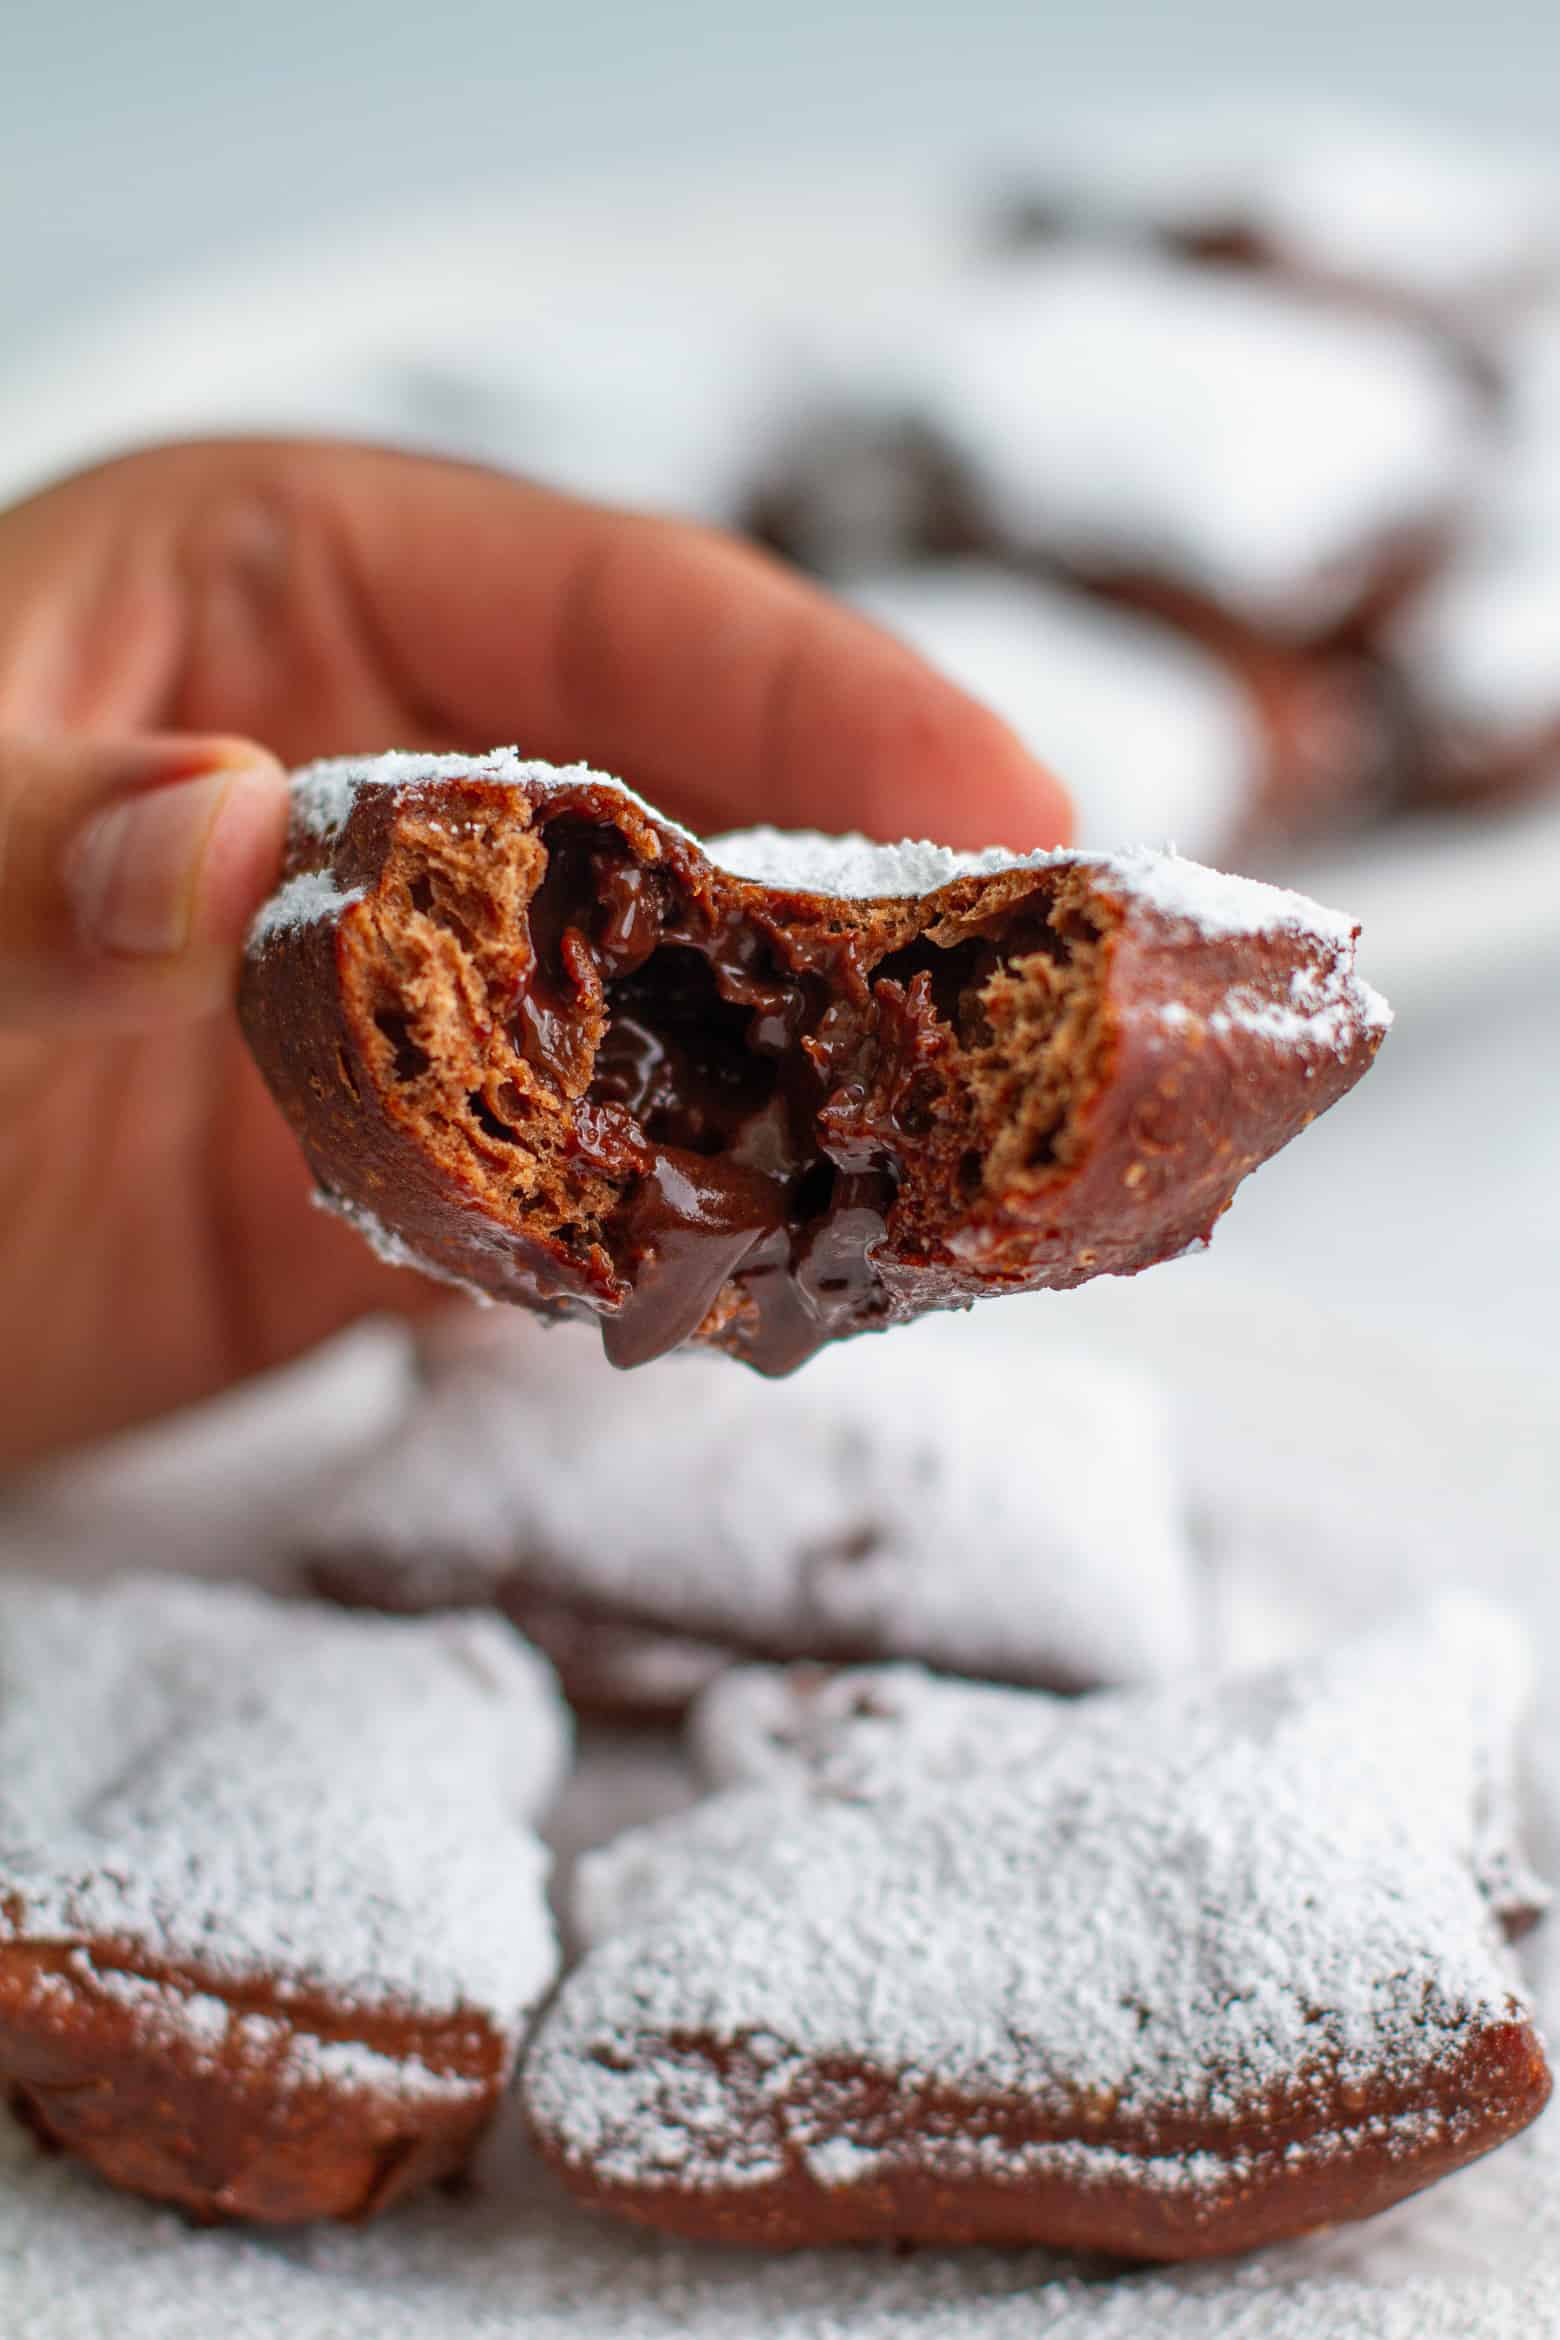 Chocolate Filled Beignets